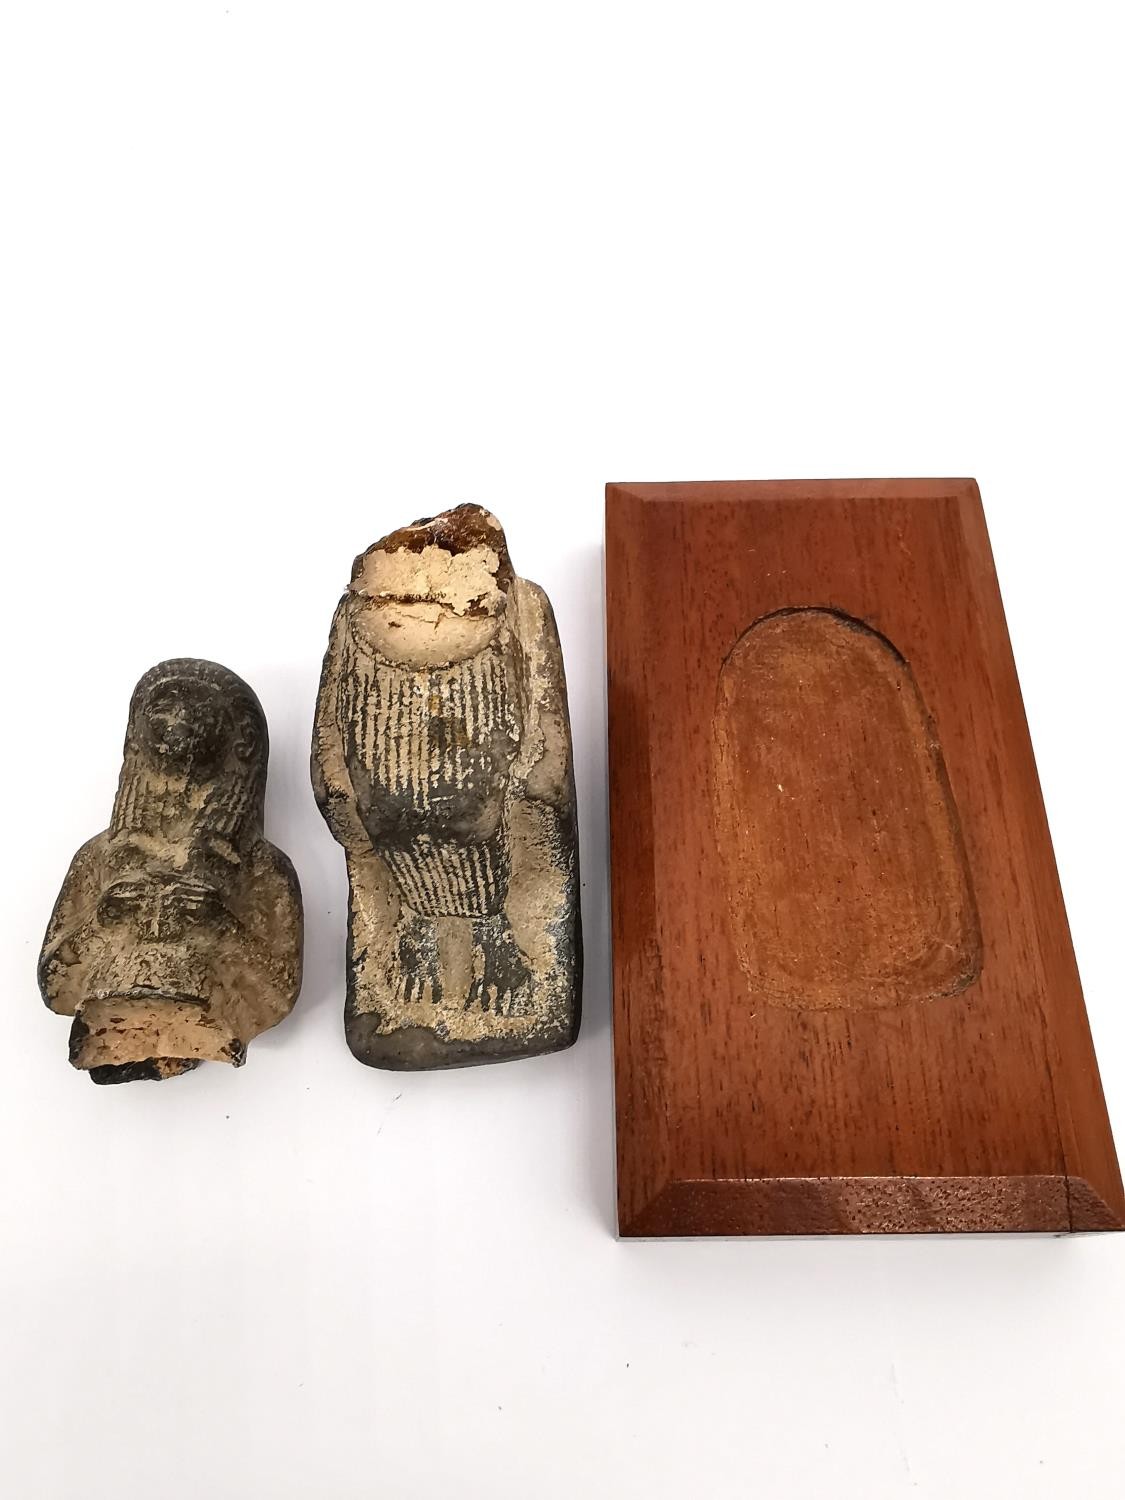 Two Egyptian-style clay ushabti on wooden plinth bases. One lying down and one seated on a - Image 5 of 9